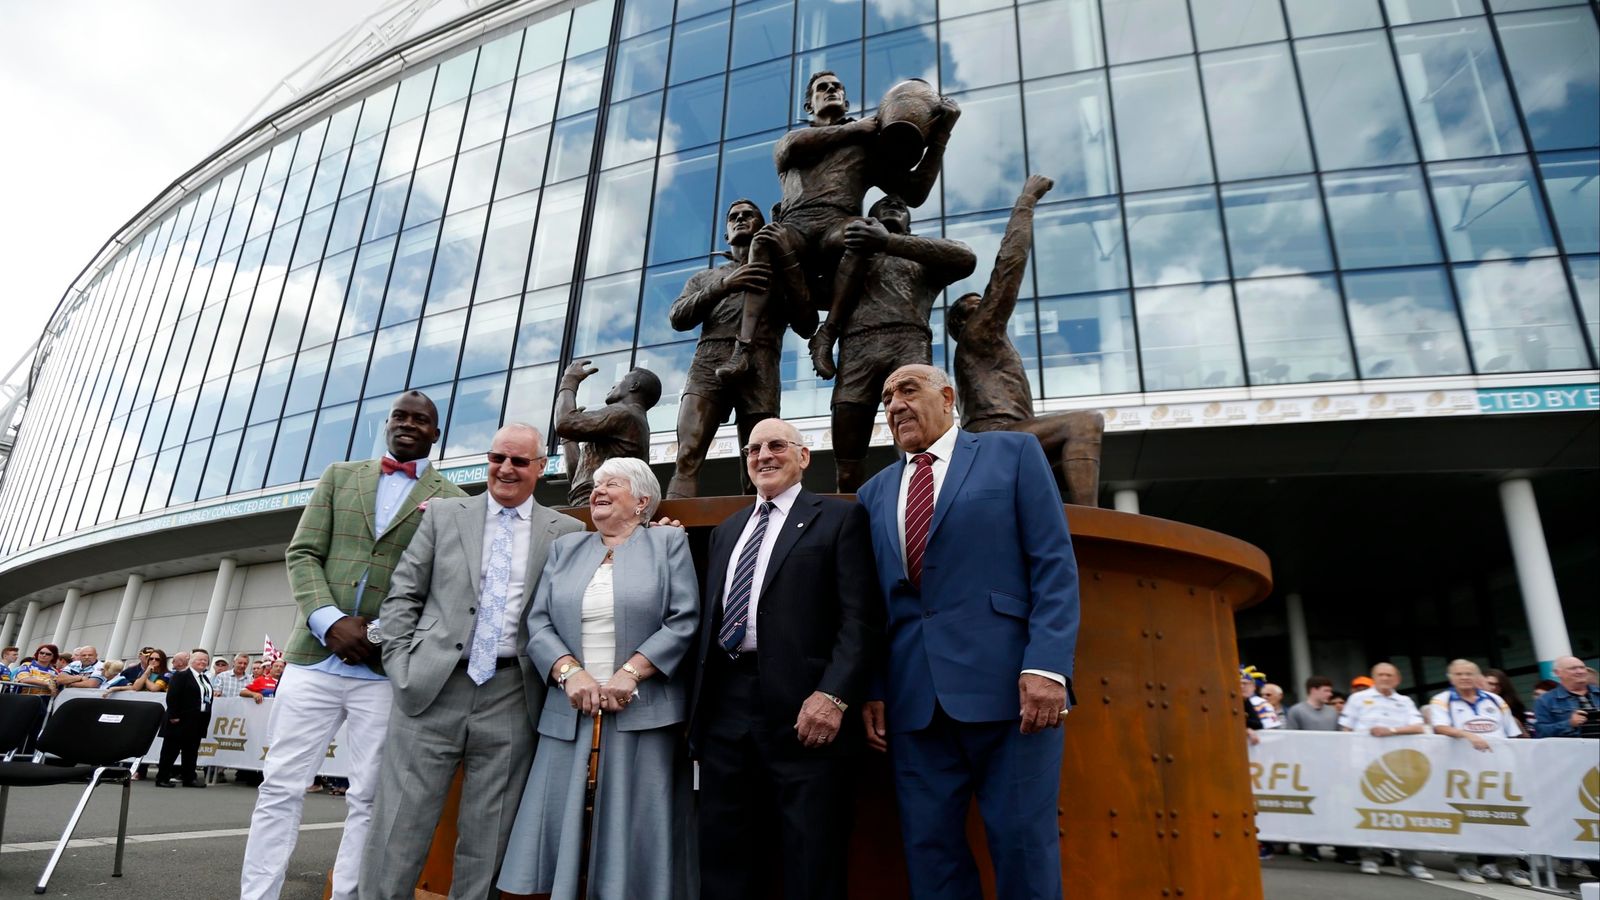 Rugby League legends immortalised in Wembley statue | Rugby League News